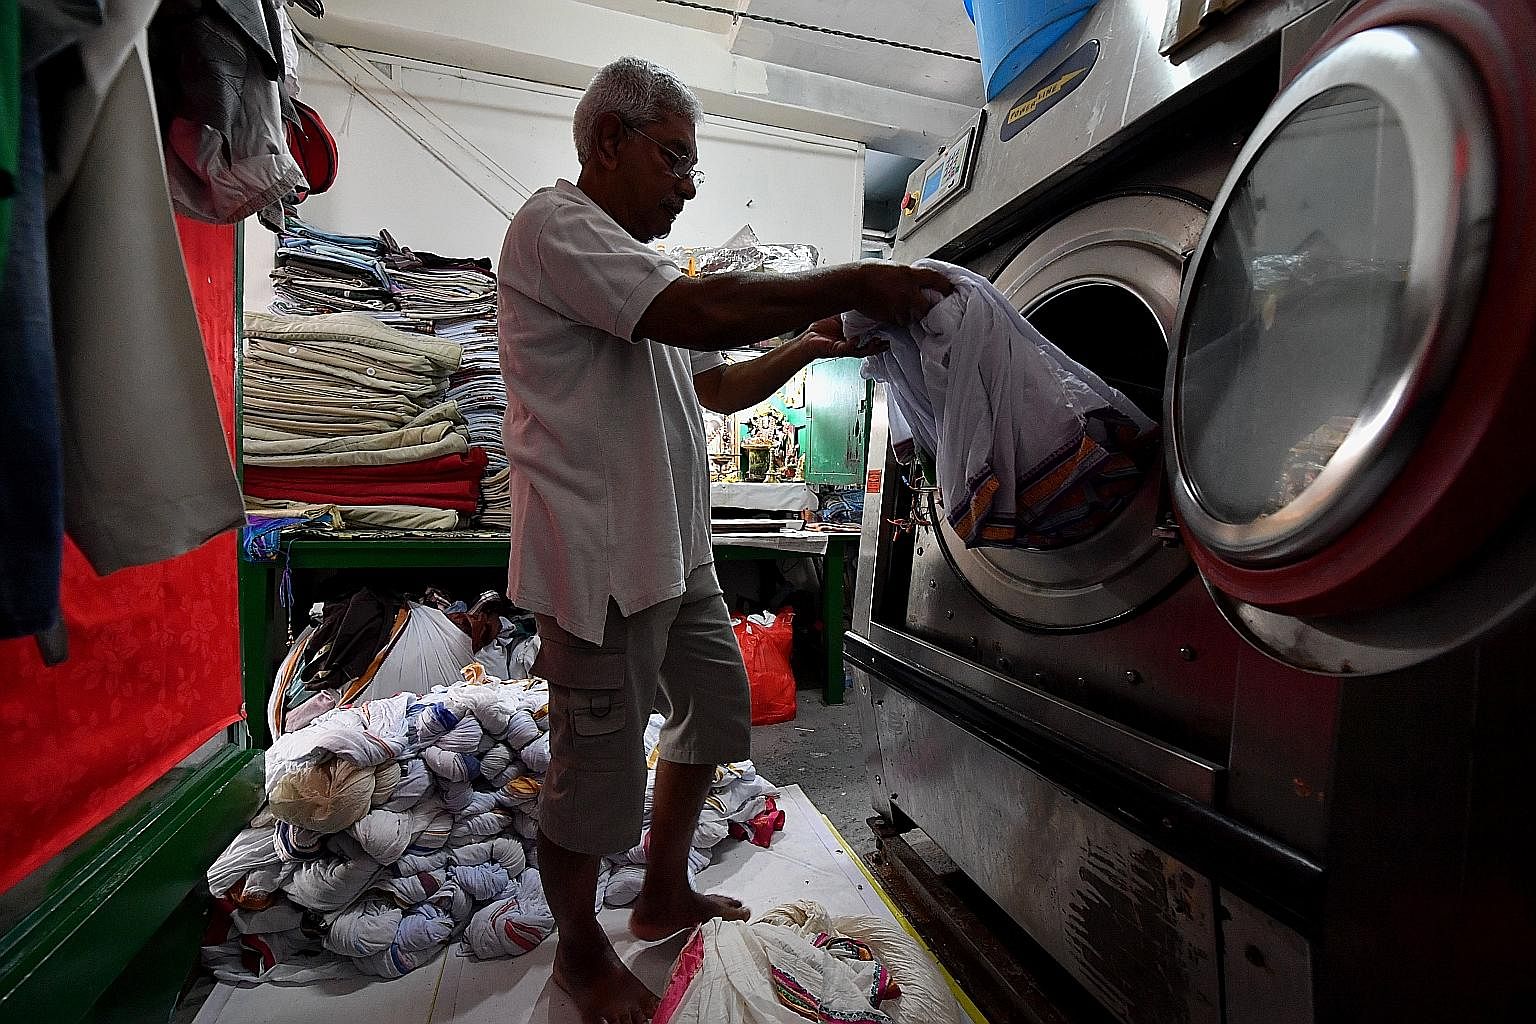 Mr Sambasivam unloading freshly washed laundry to be starched and dried later. The 73-year-old is a family friend who helps out in the shop, doing mainly administrative work. Left: After starching, the white dhotis are soaked in a pail of water with 